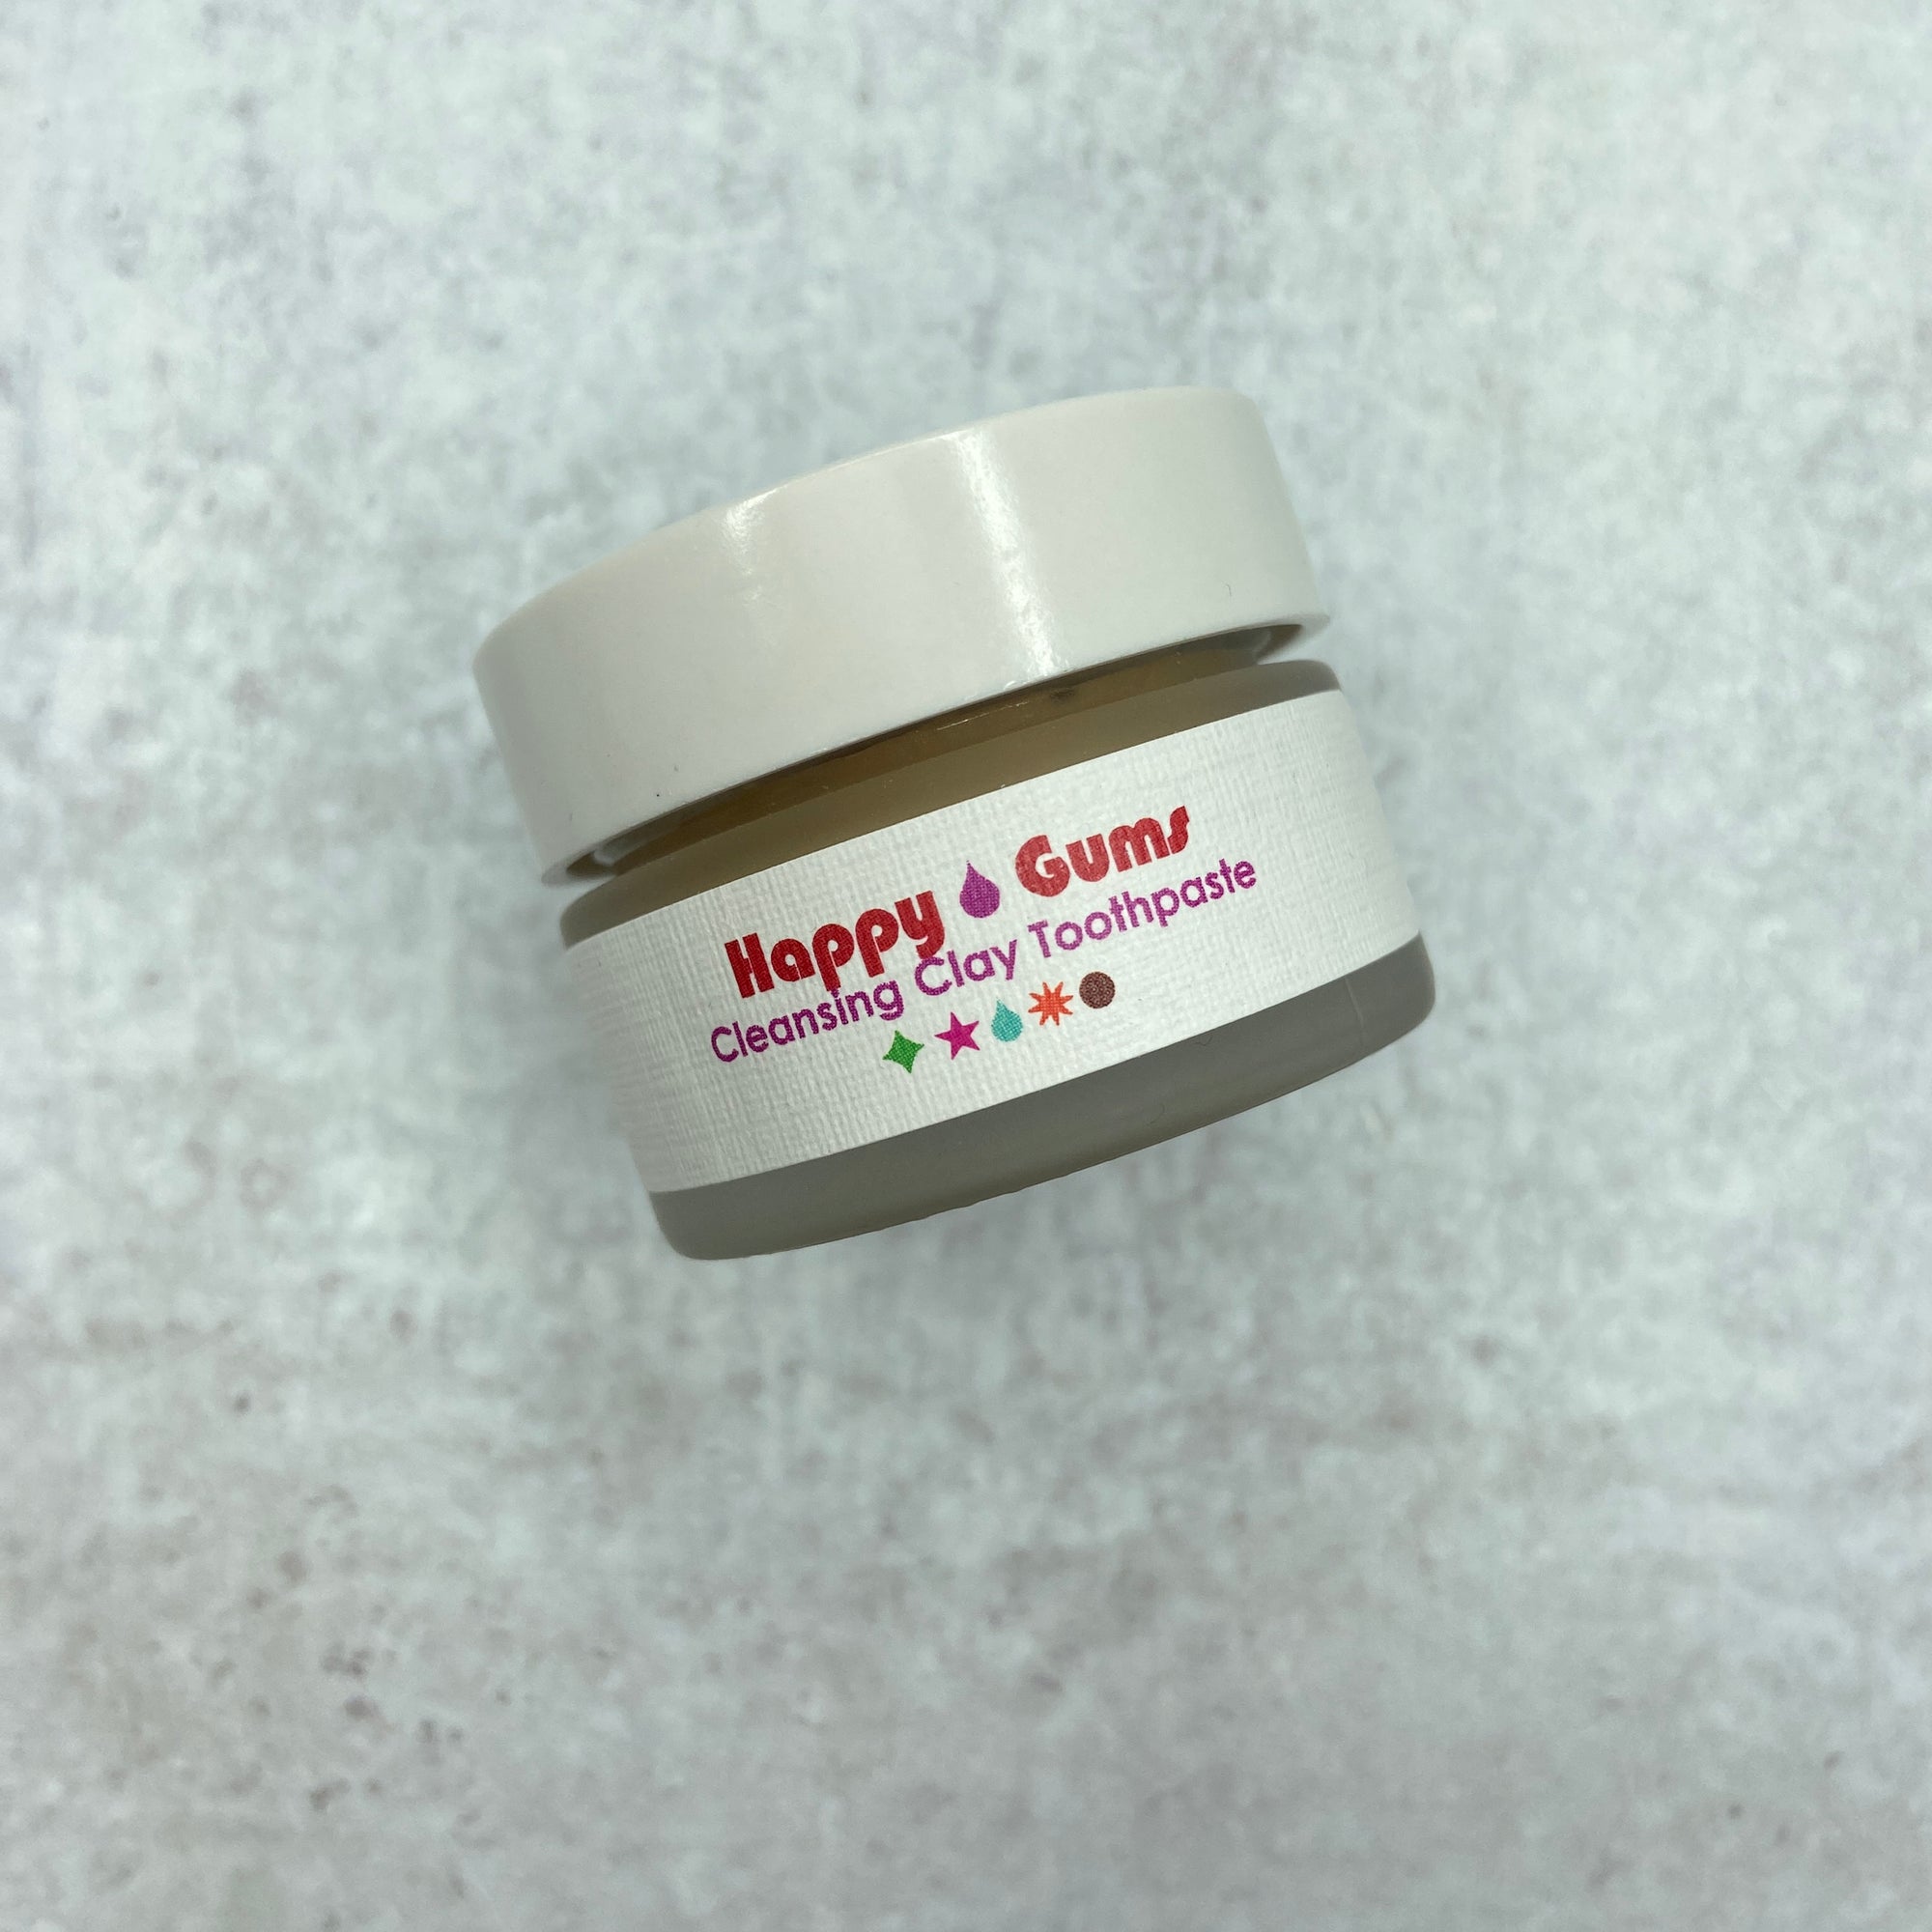 Happy Gums Cleansing Clay Toothpaste